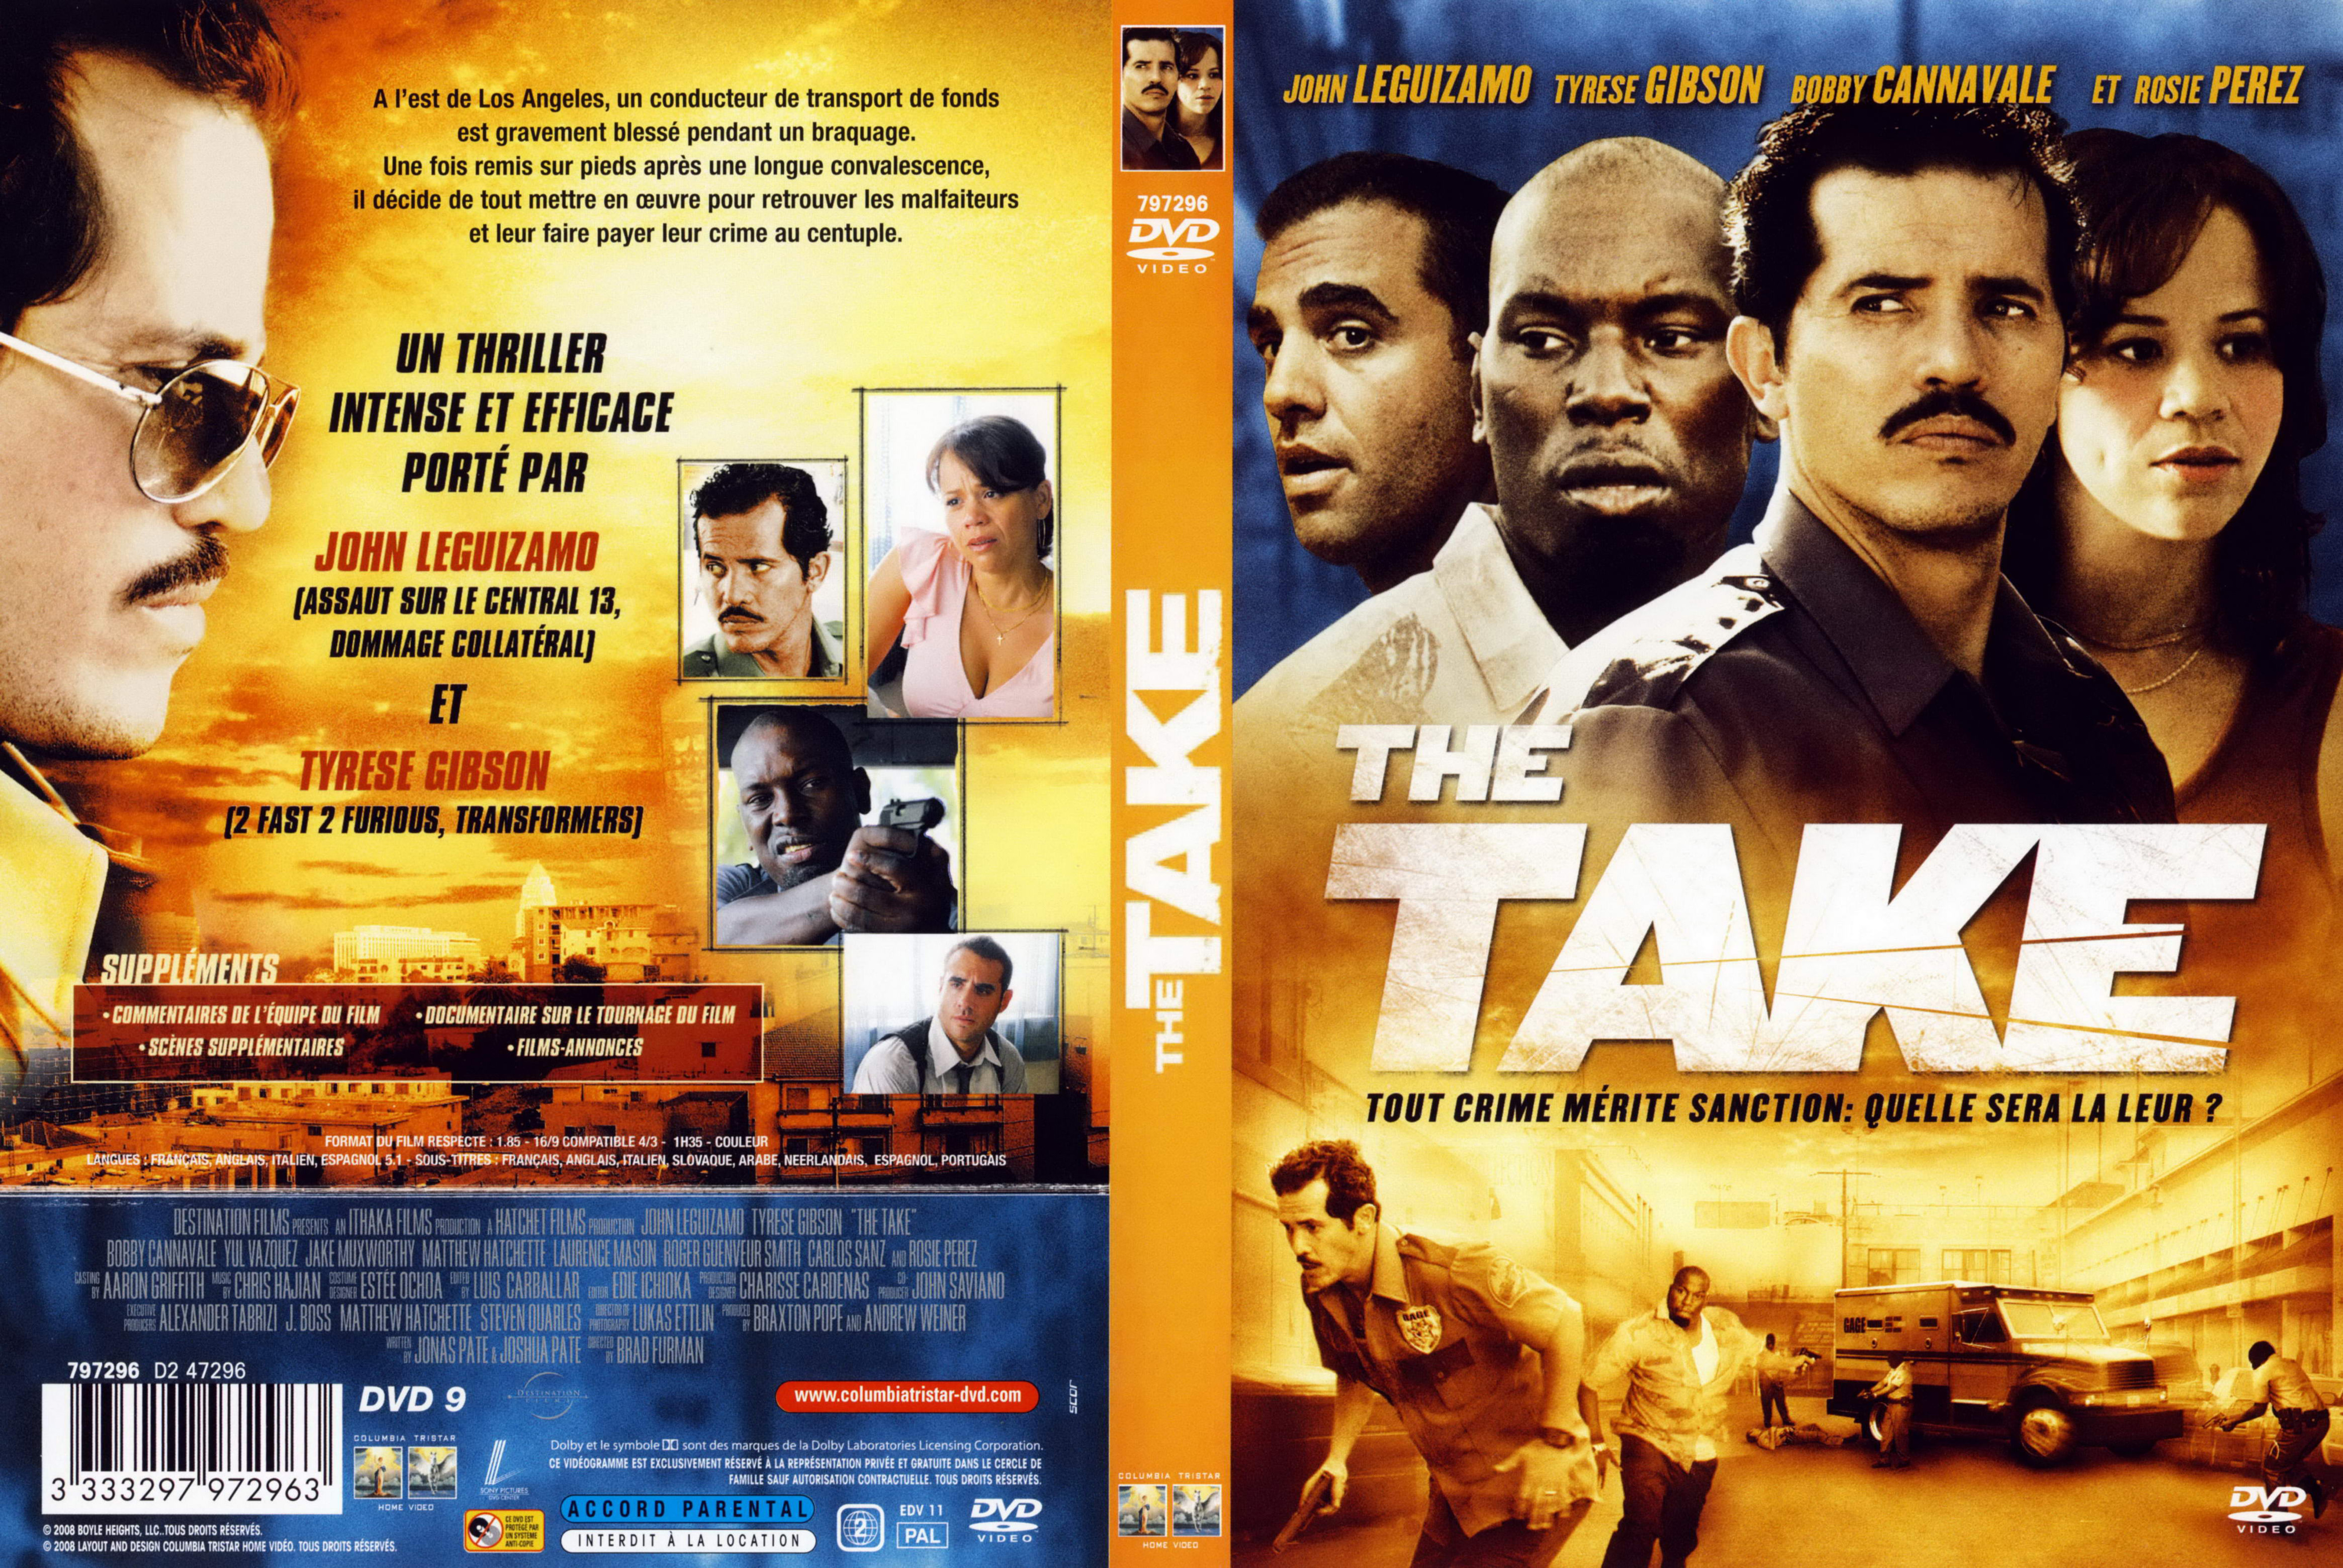 Jaquette DVD The takev2